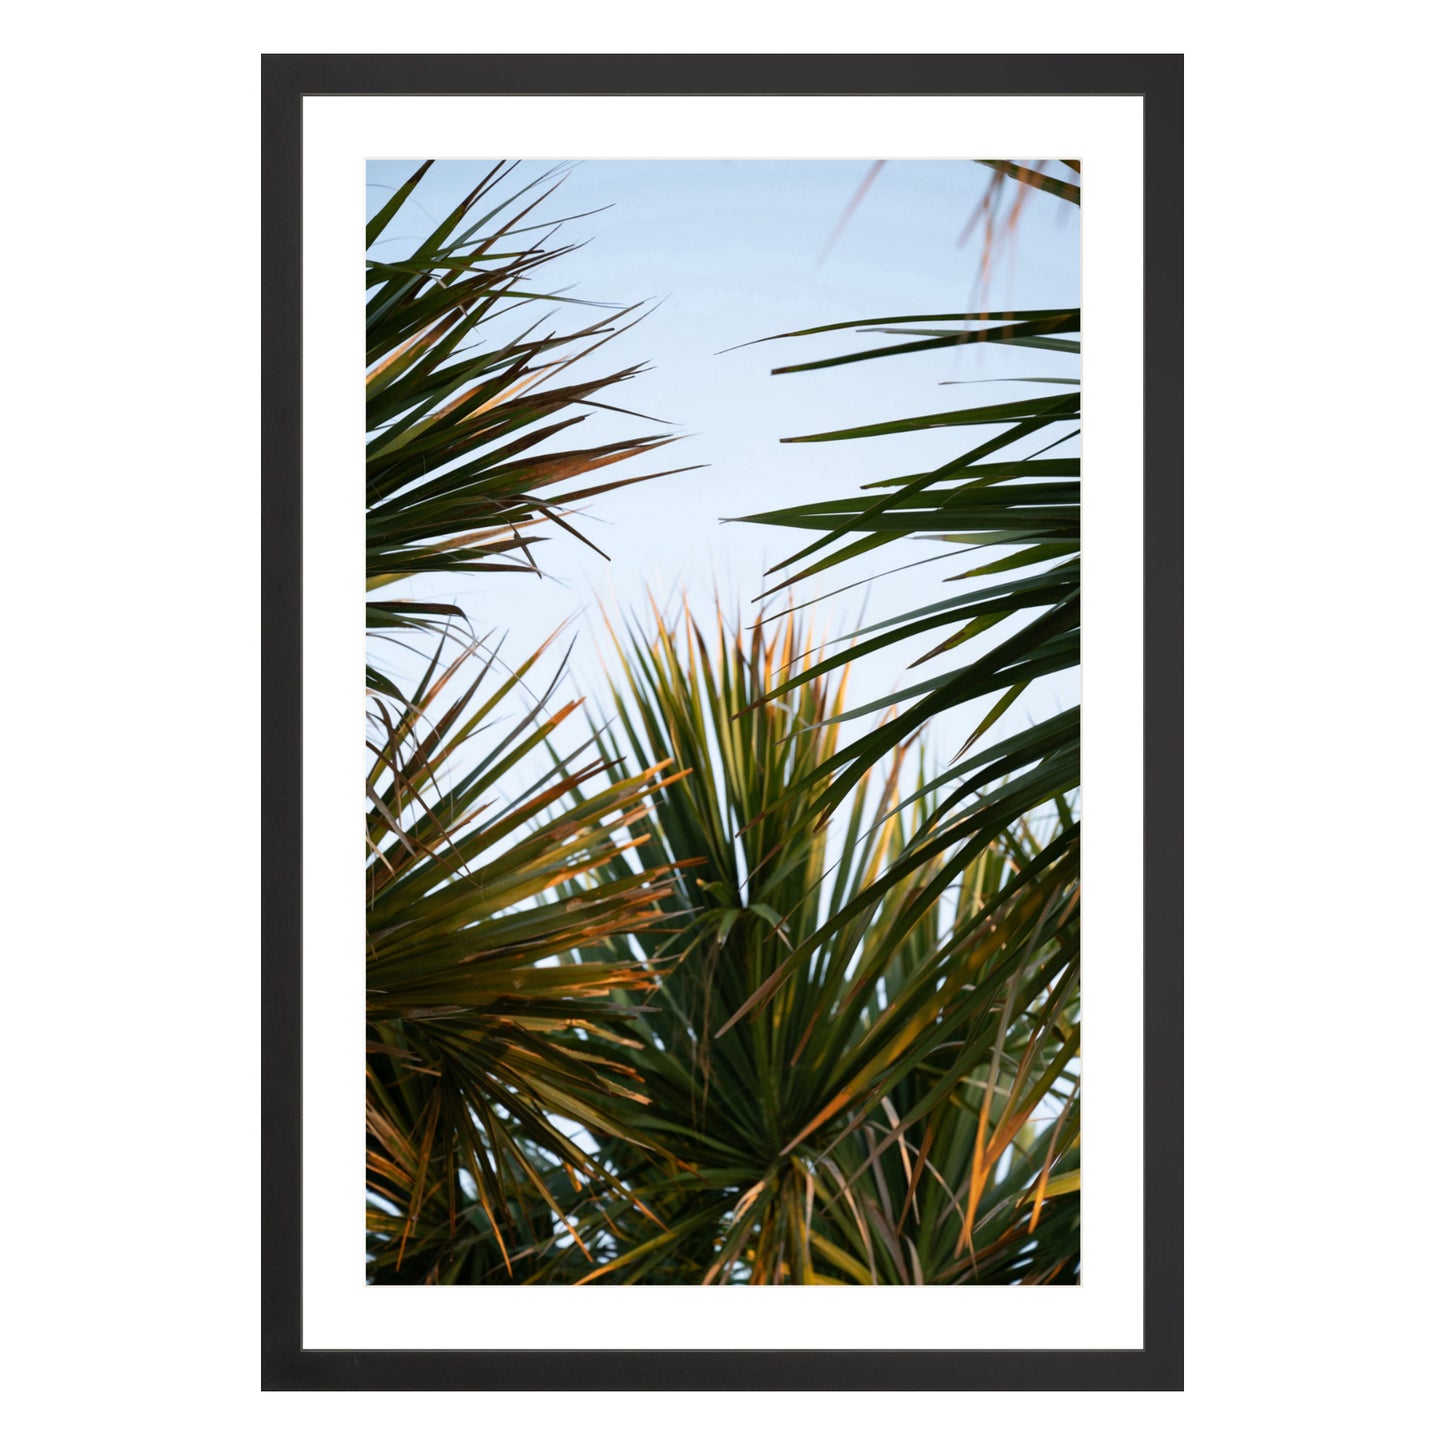 Photograph of beach palms in front of blue sky framed in black with white mat